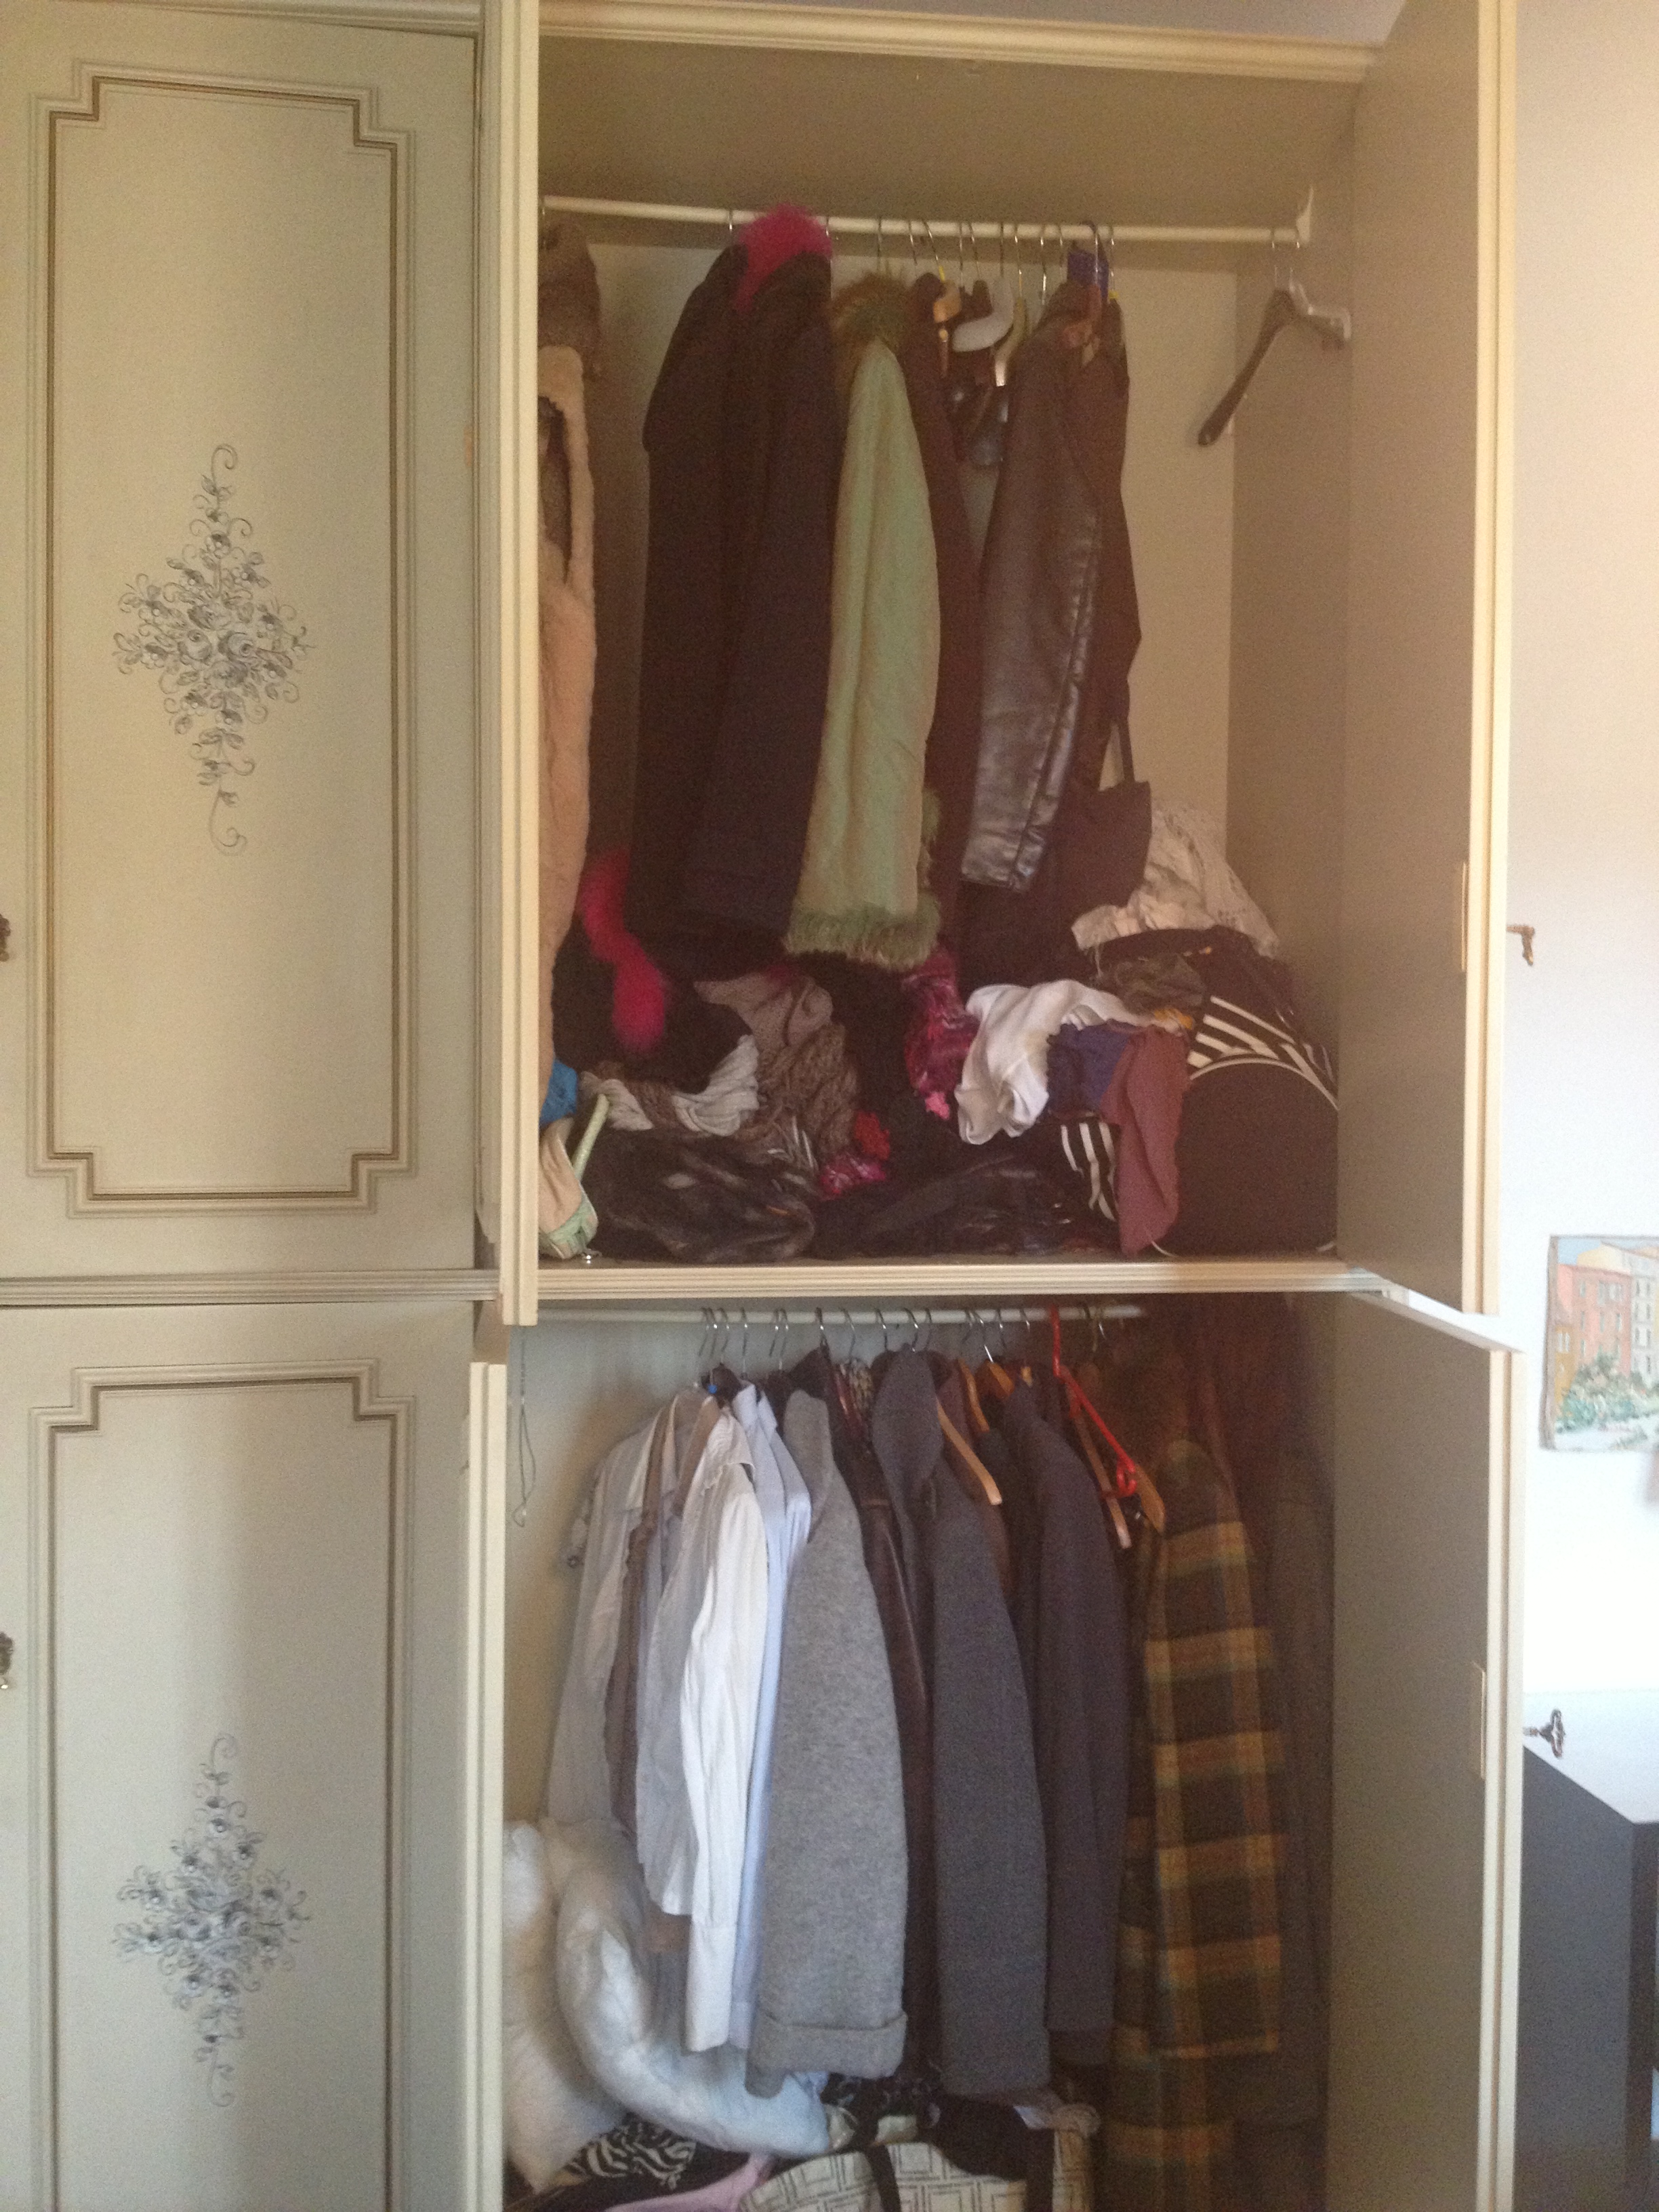 Your bedroom - closets crammed with hosts items.